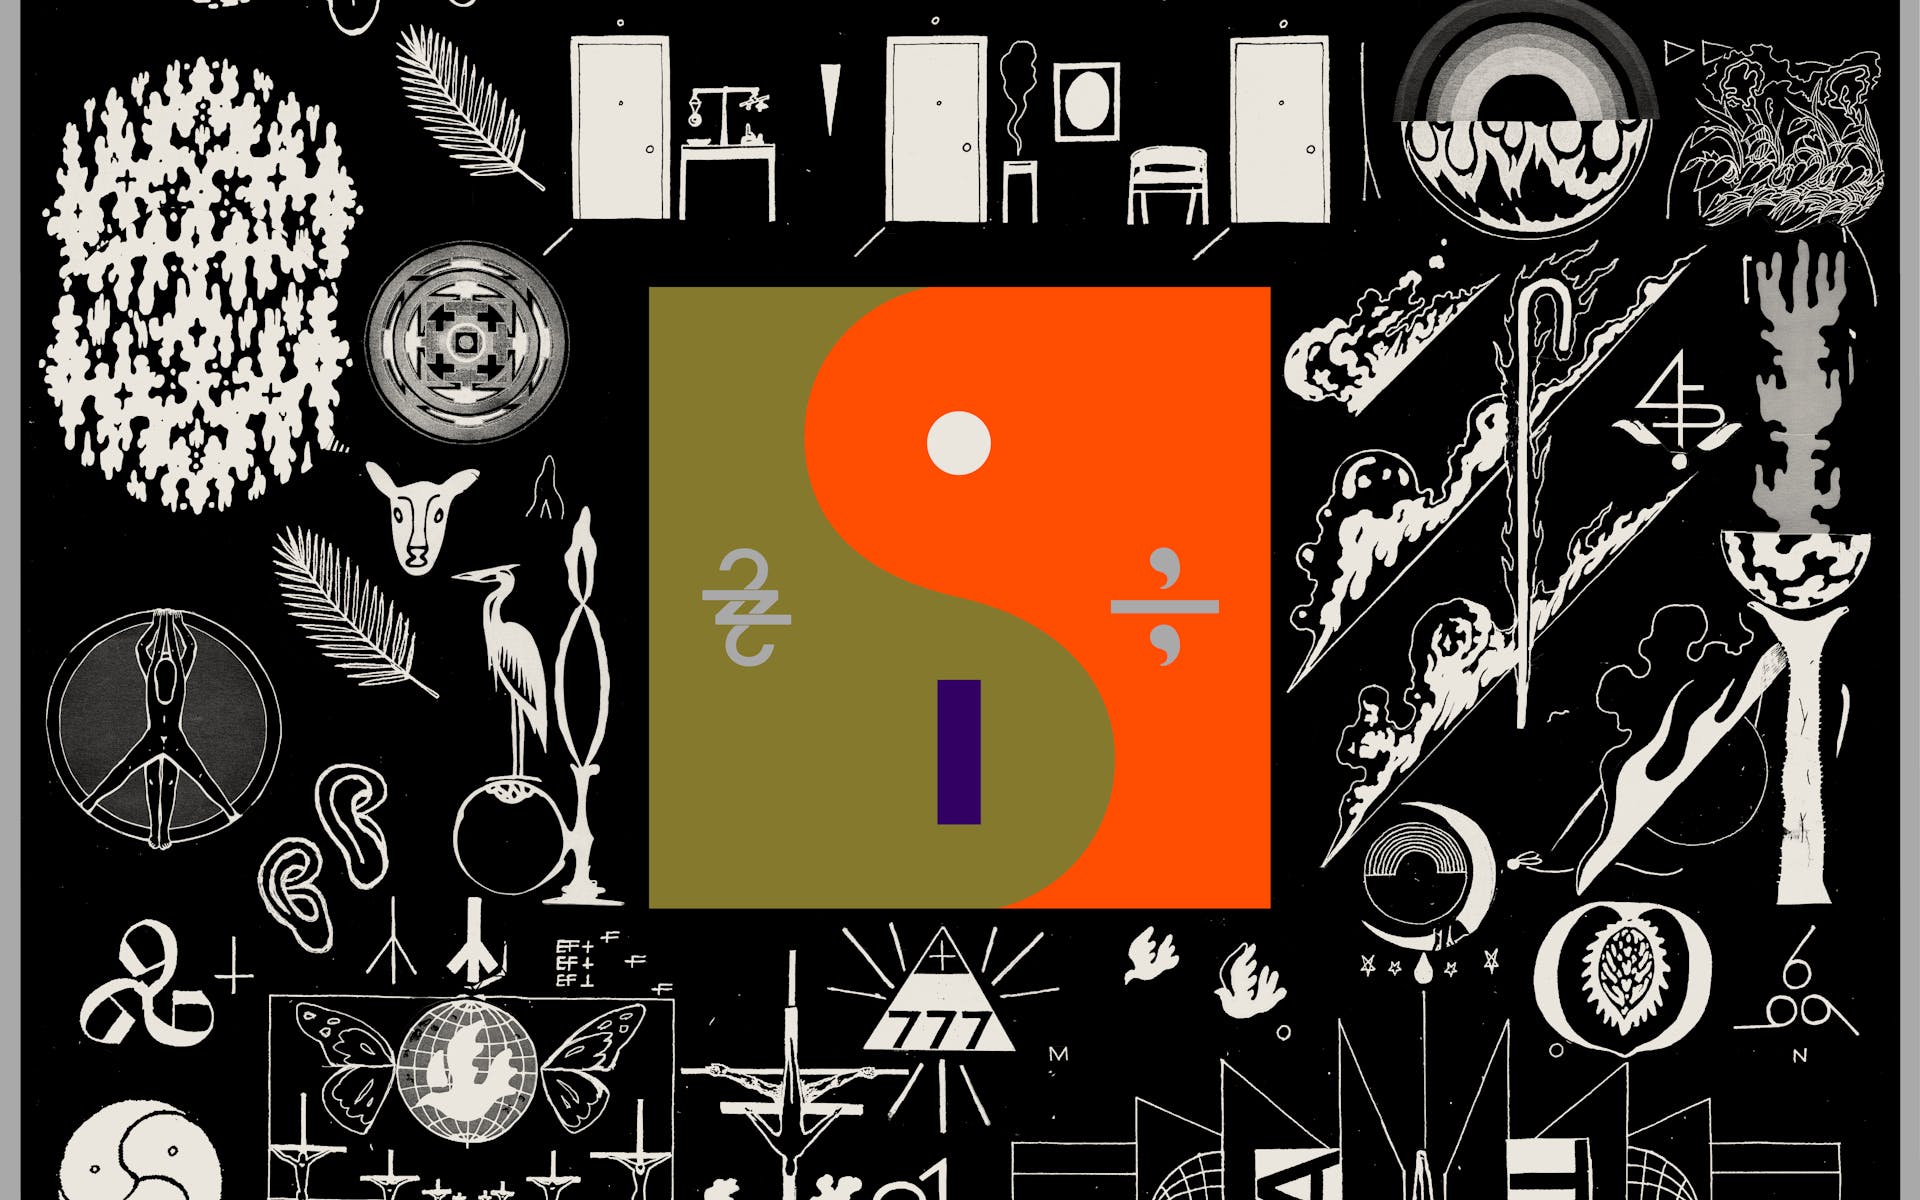 Front cover of album featuring a variety of small symbols surrounding a squared off yin yang symbol